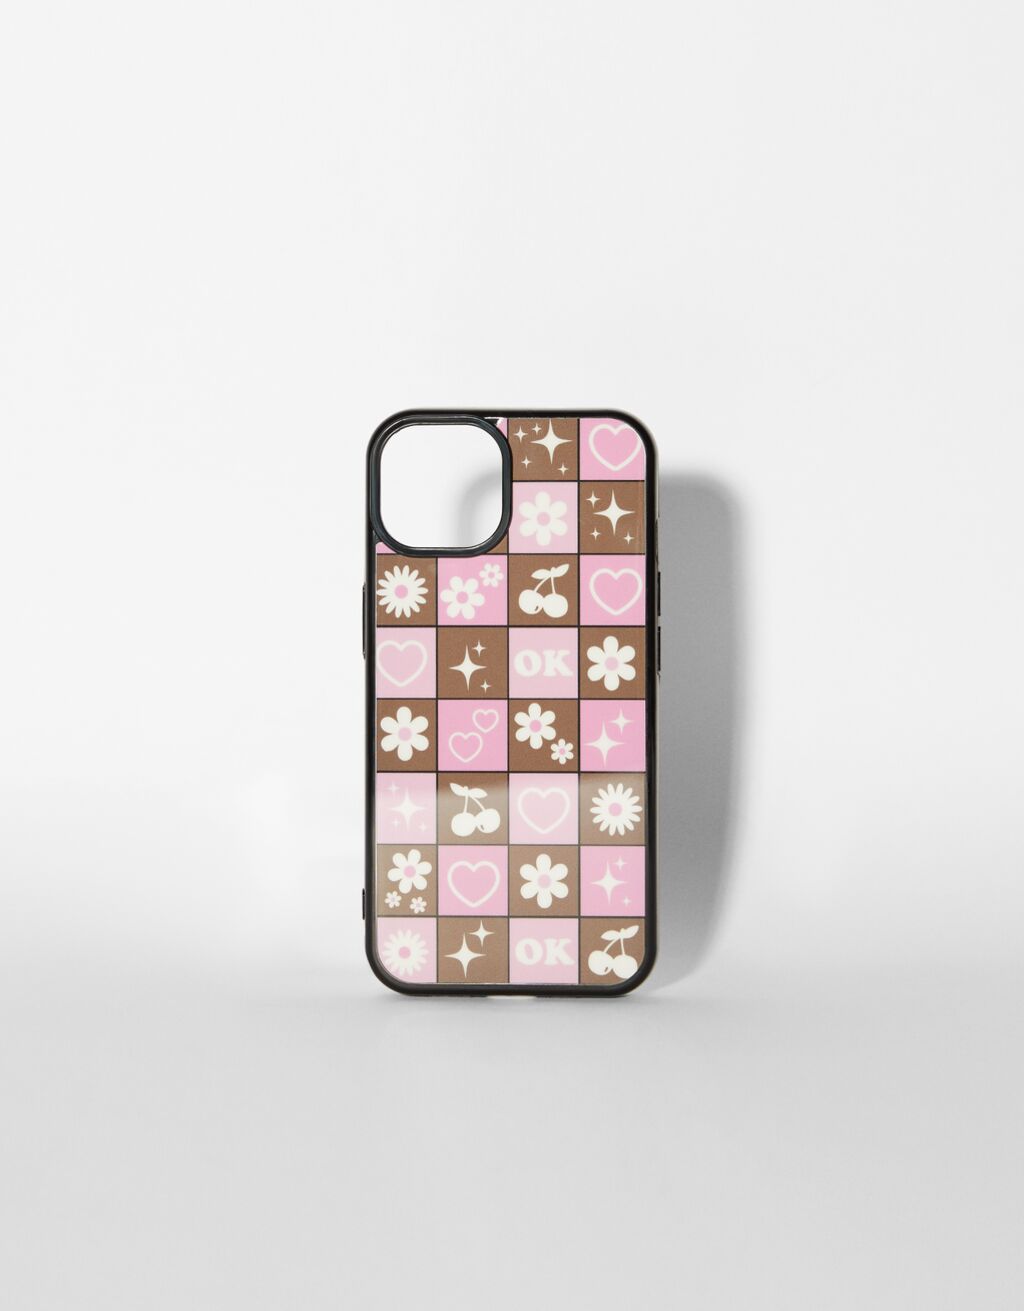 Printed mobile phone case